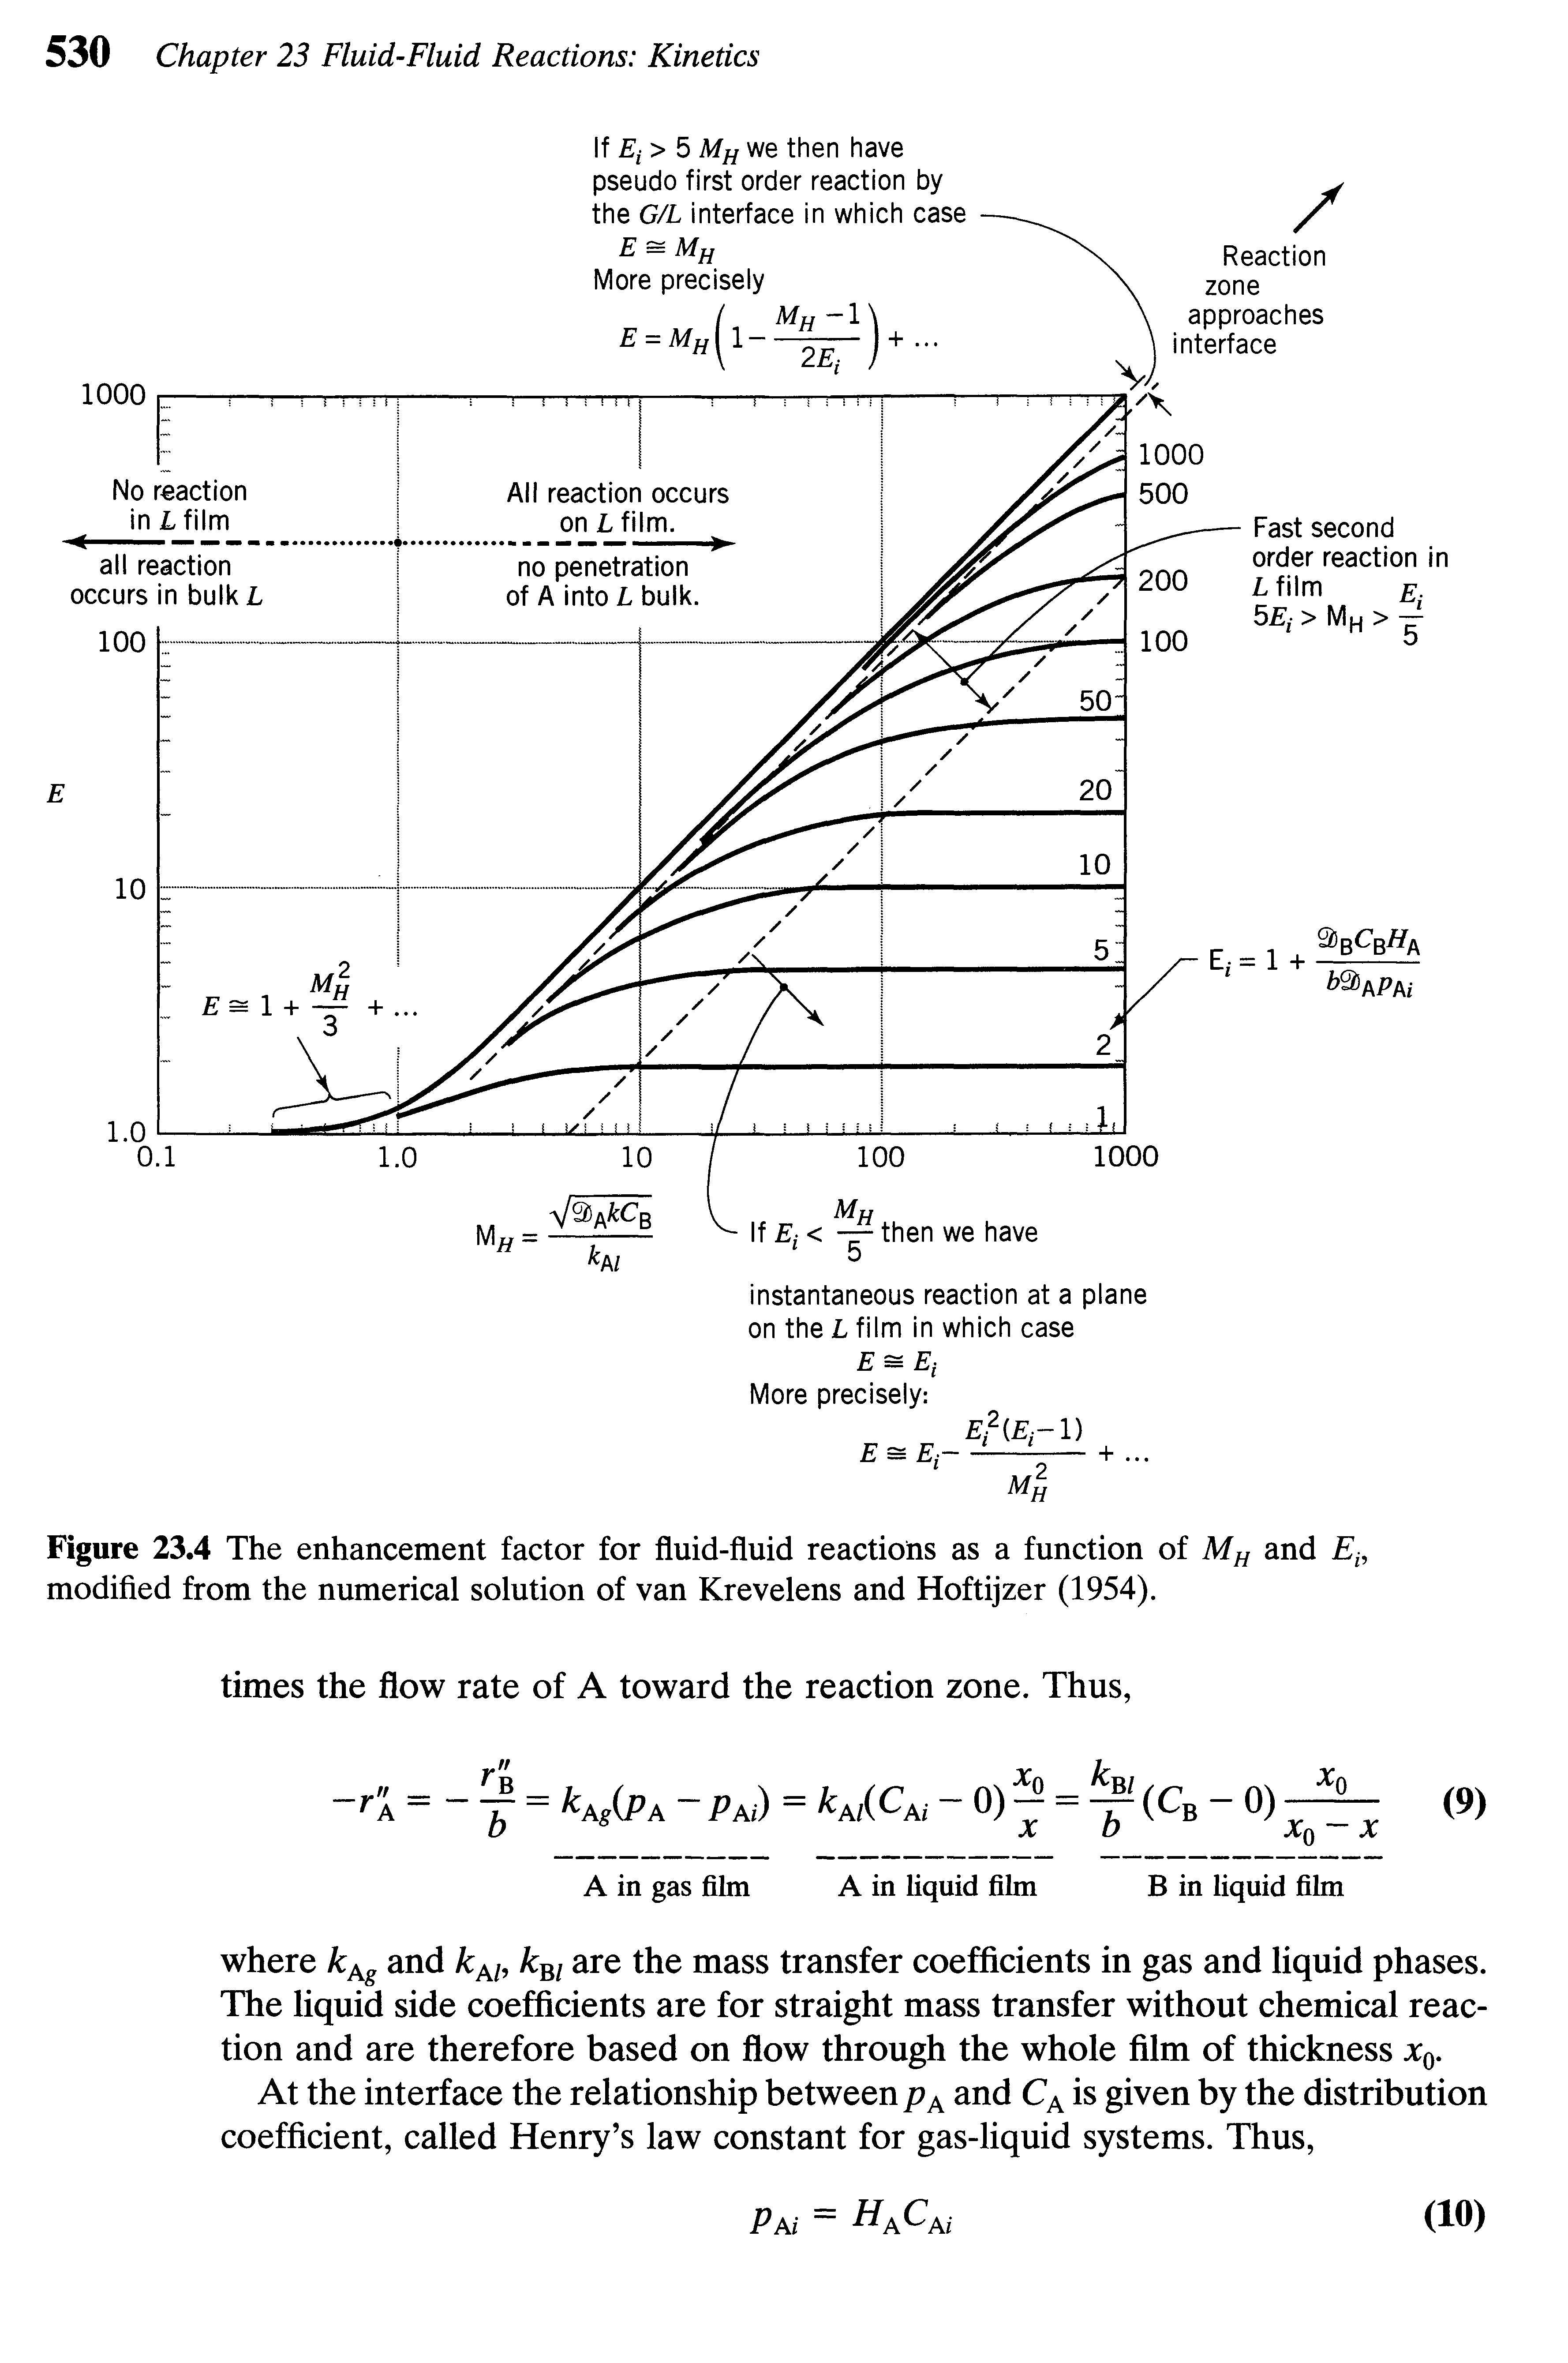 Figure 23.4 The enhancement factor for fluid-fluid reactions as a function of Mf and modified from the numerical solution of van Krevelens and Hoftijzer (1954).